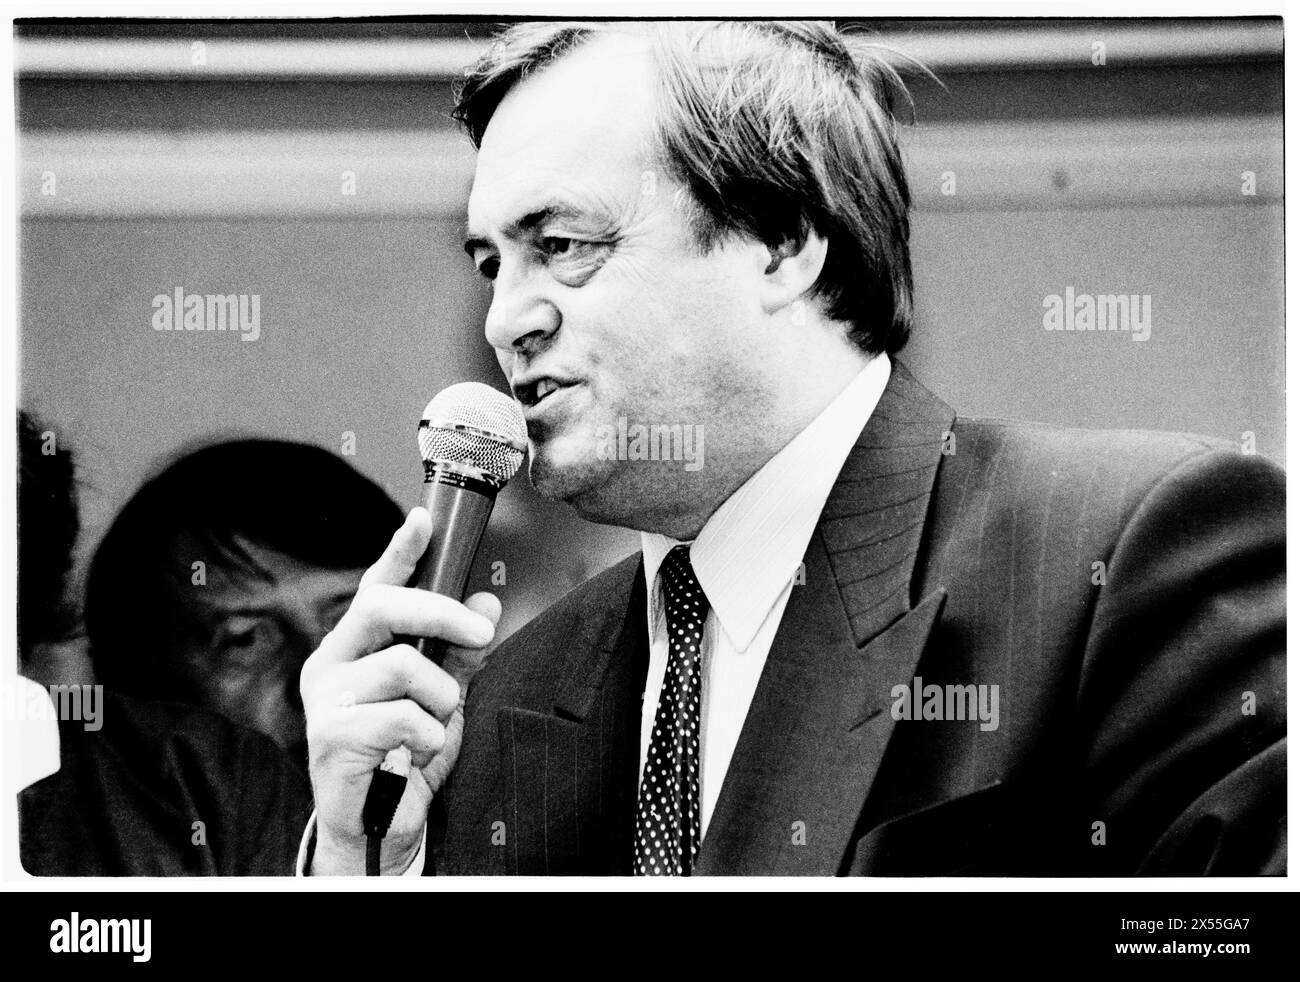 JOHN PRESCOTT, DEPUTY LEADER, LABOUR PARTY, 1995: Deputy Leader of the Labour Party John Pescott makes a passionate speech campaigning for New Labour on the Rolling Rose Tour at St David's Hall in Cardiff, Wales UK on 5 July 1995. The Rolling Rose Tour was a series of hustings designed to increase Labour Party membership while in opposition.  Photo: Rob Watkins.  INFO: John Prescott, a British politician born in Prestatyn Wales in 1938, served as Deputy Prime Minister under Tony Blair from 1997 to 2007. A prominent figure in the Labour Party, he championed social justice and environmental caus Stock Photo